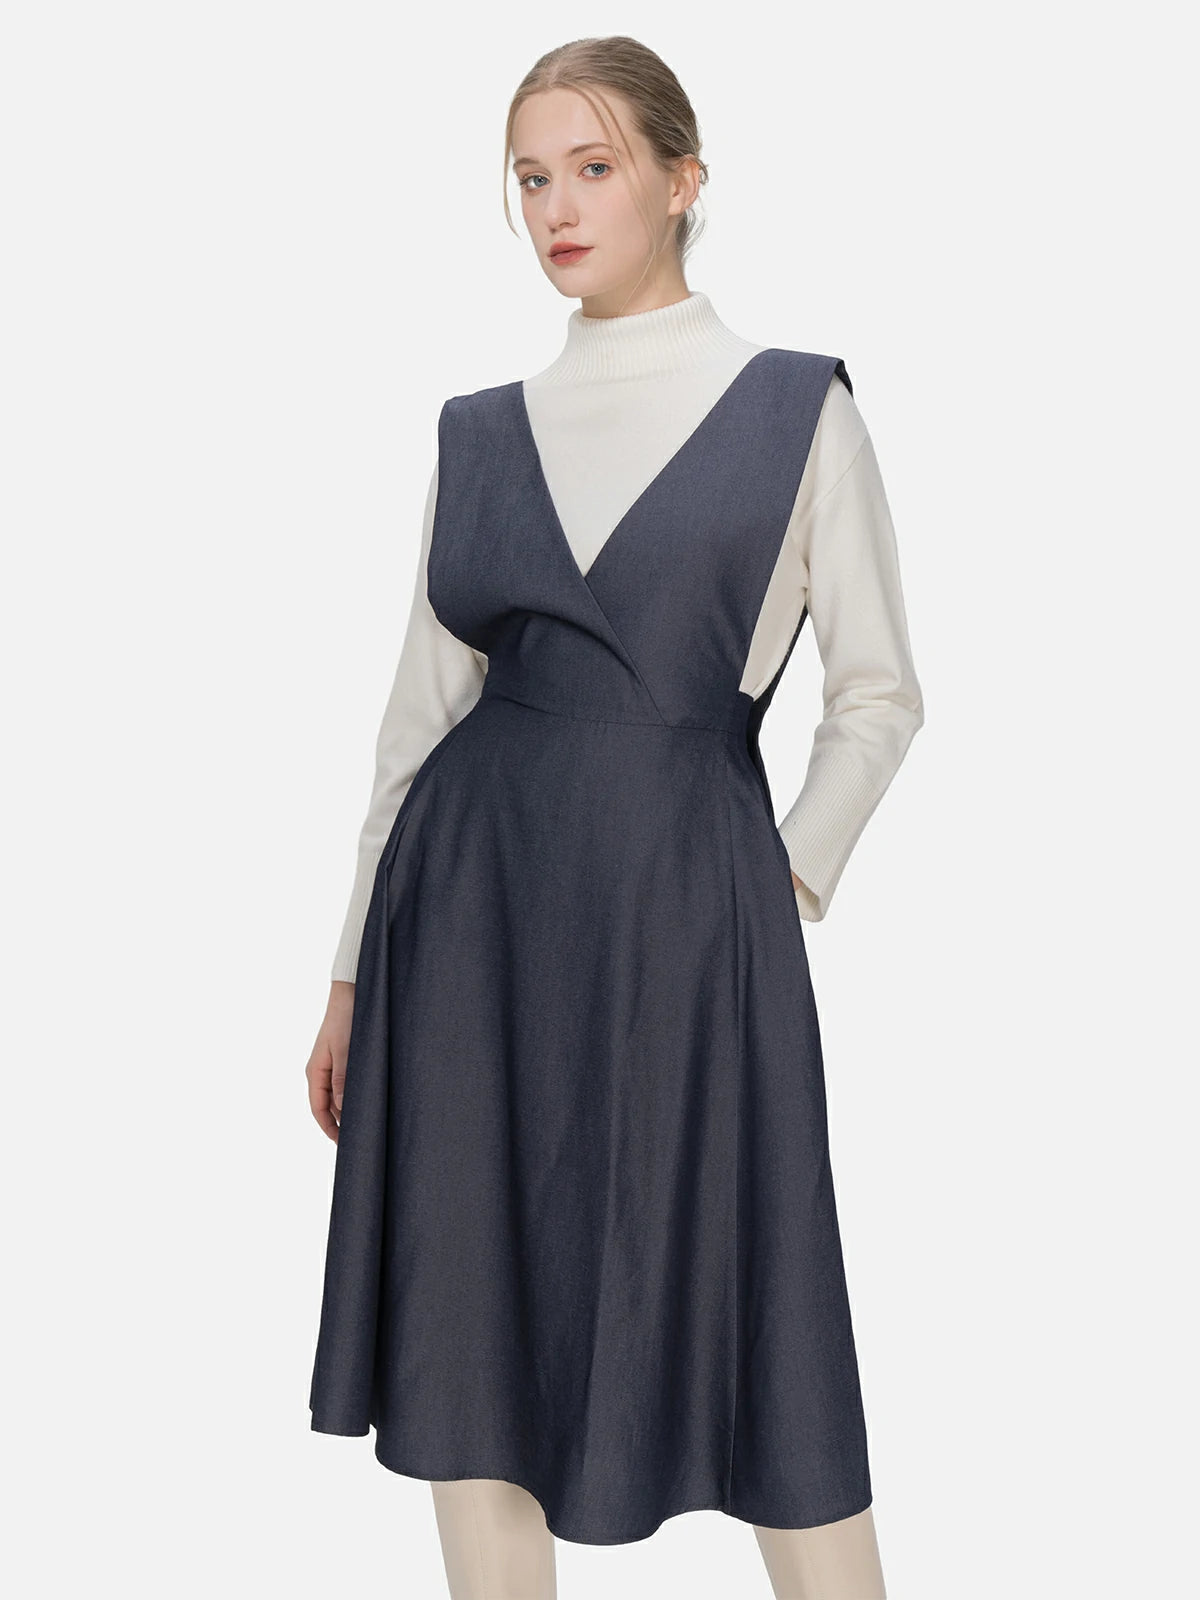 Tailored V-neck overall dress with an elastic waist design, overall strap detail, and versatile fashion, providing a snug fit and an elegant silhouette adaptable to different occasions.